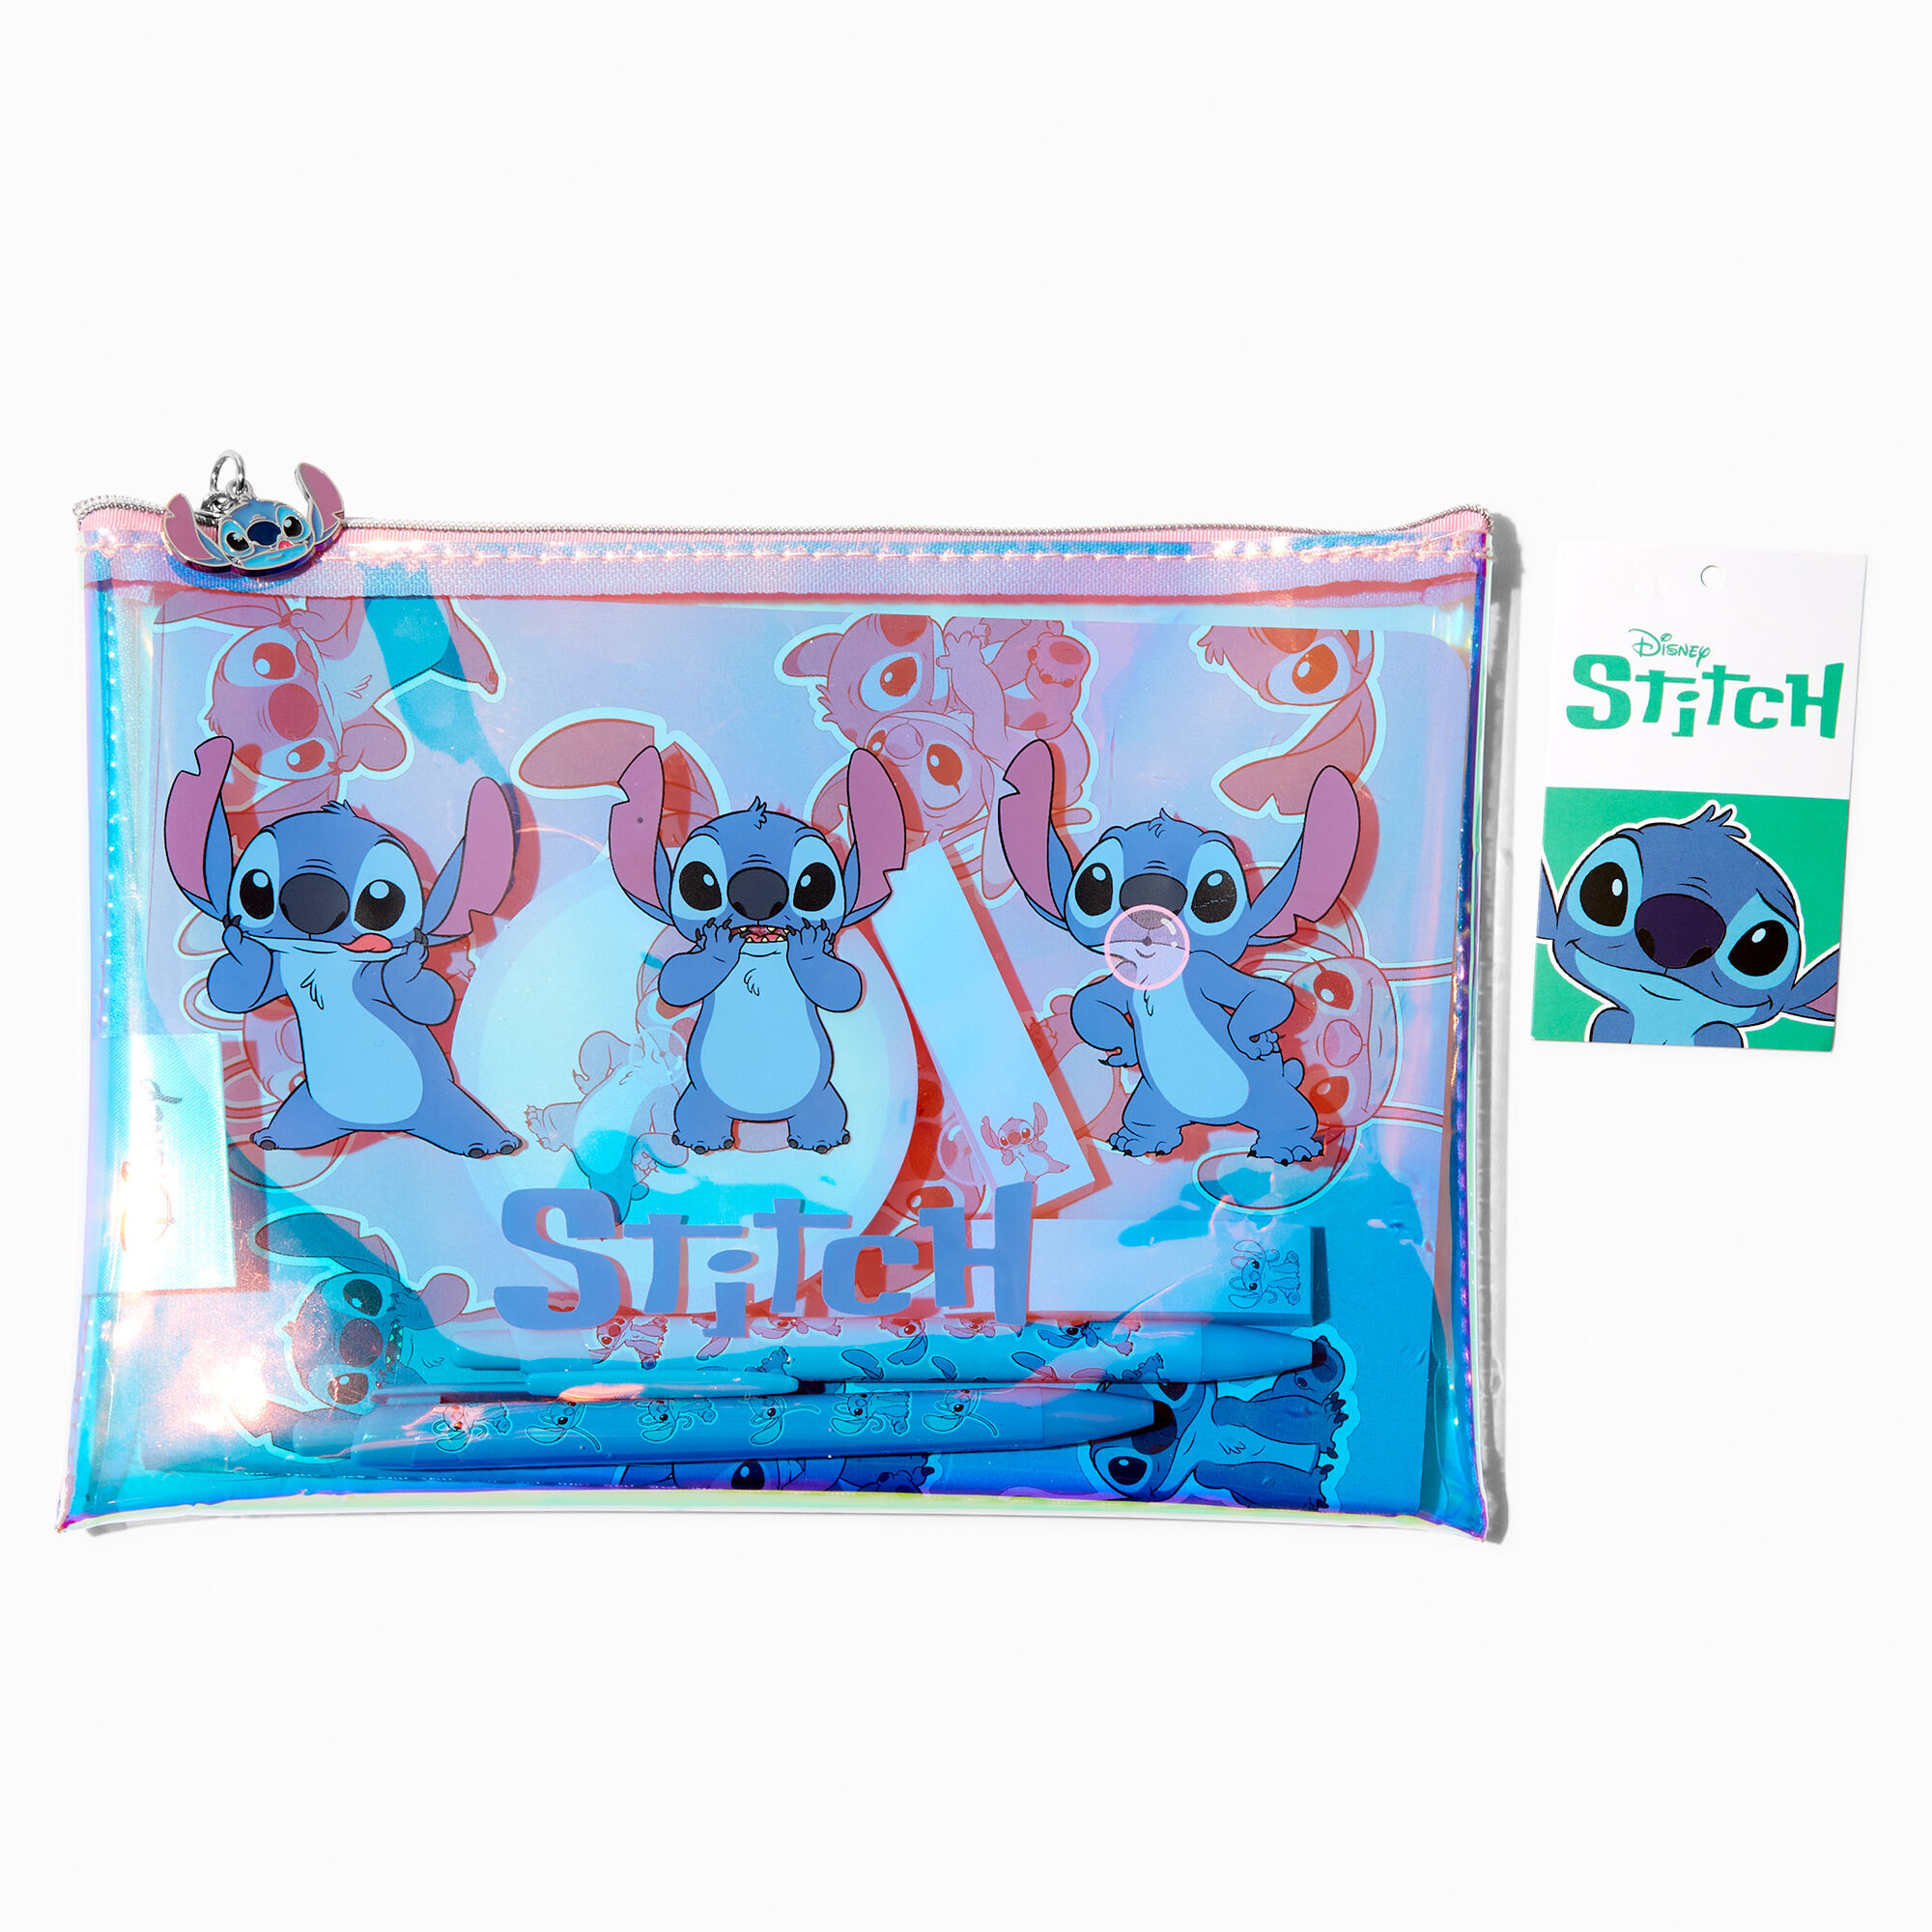 Lilo & Stitch 11 Pc Value Pack Back to School Stationery Supplies